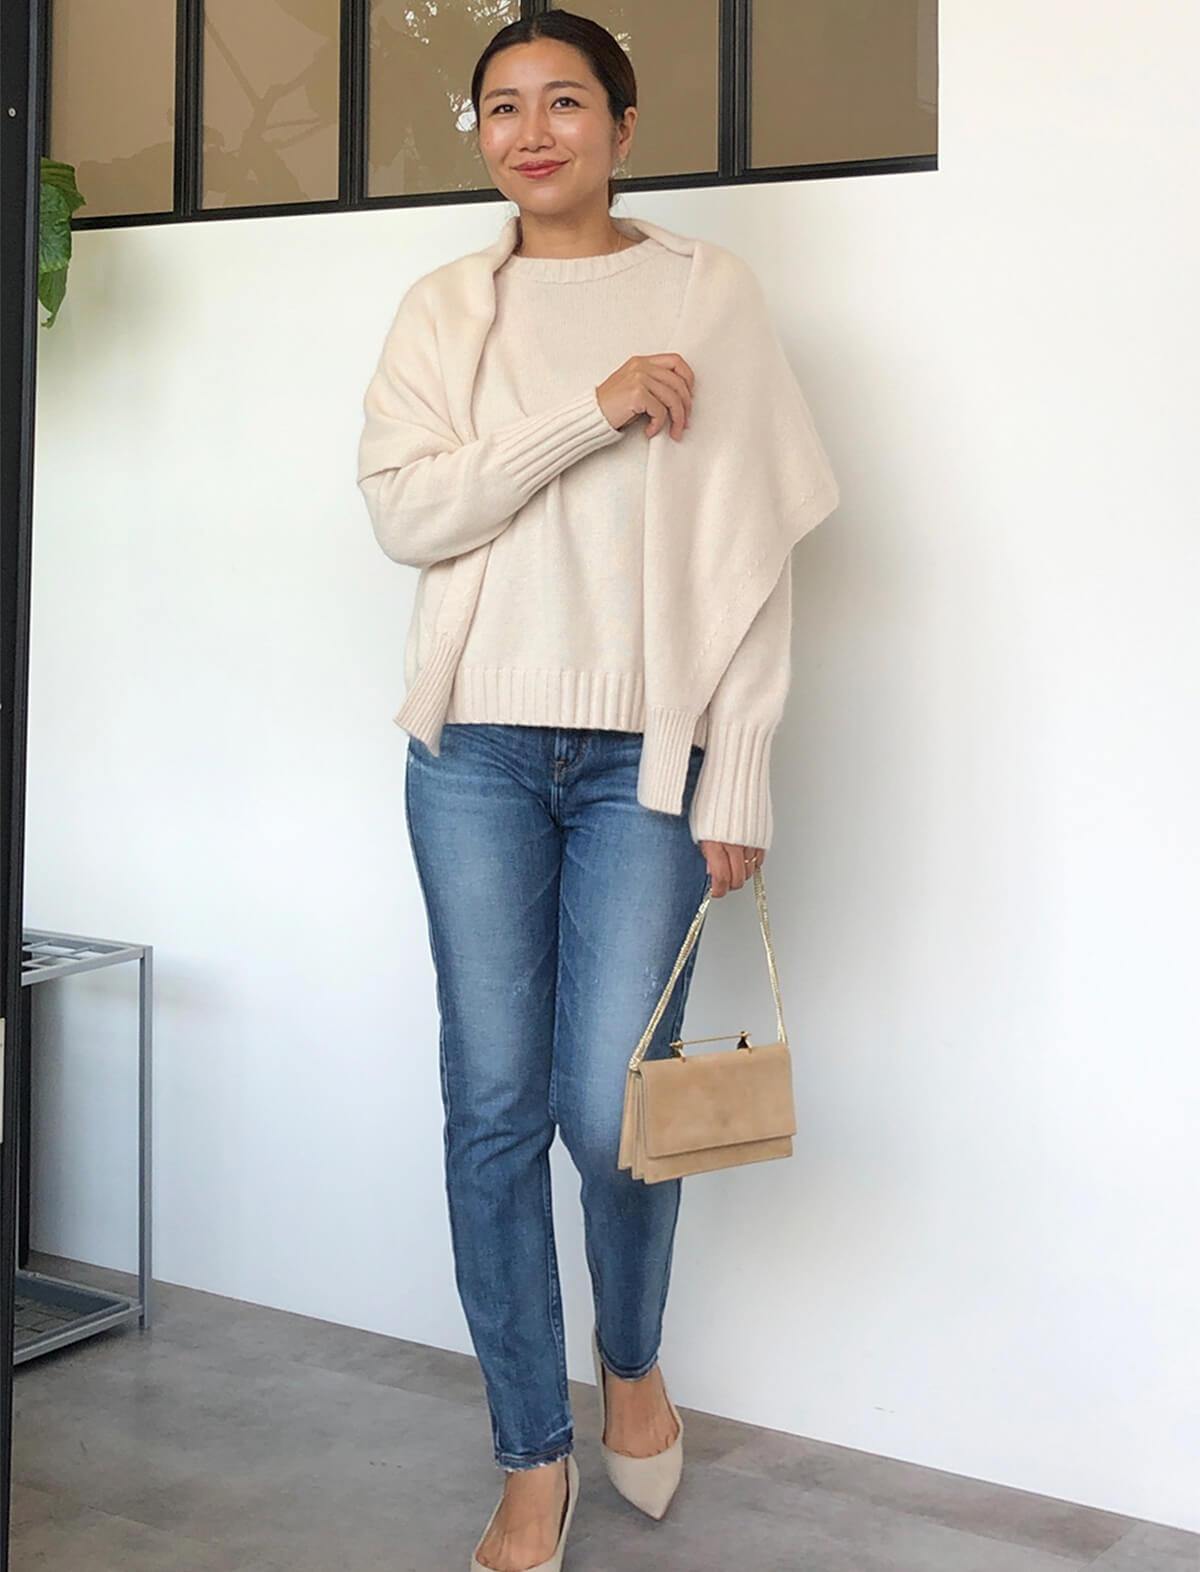 UPPER HIGHTS The Stella Midrise Girlfriend Jeans in Moon | CLOSET Singapore